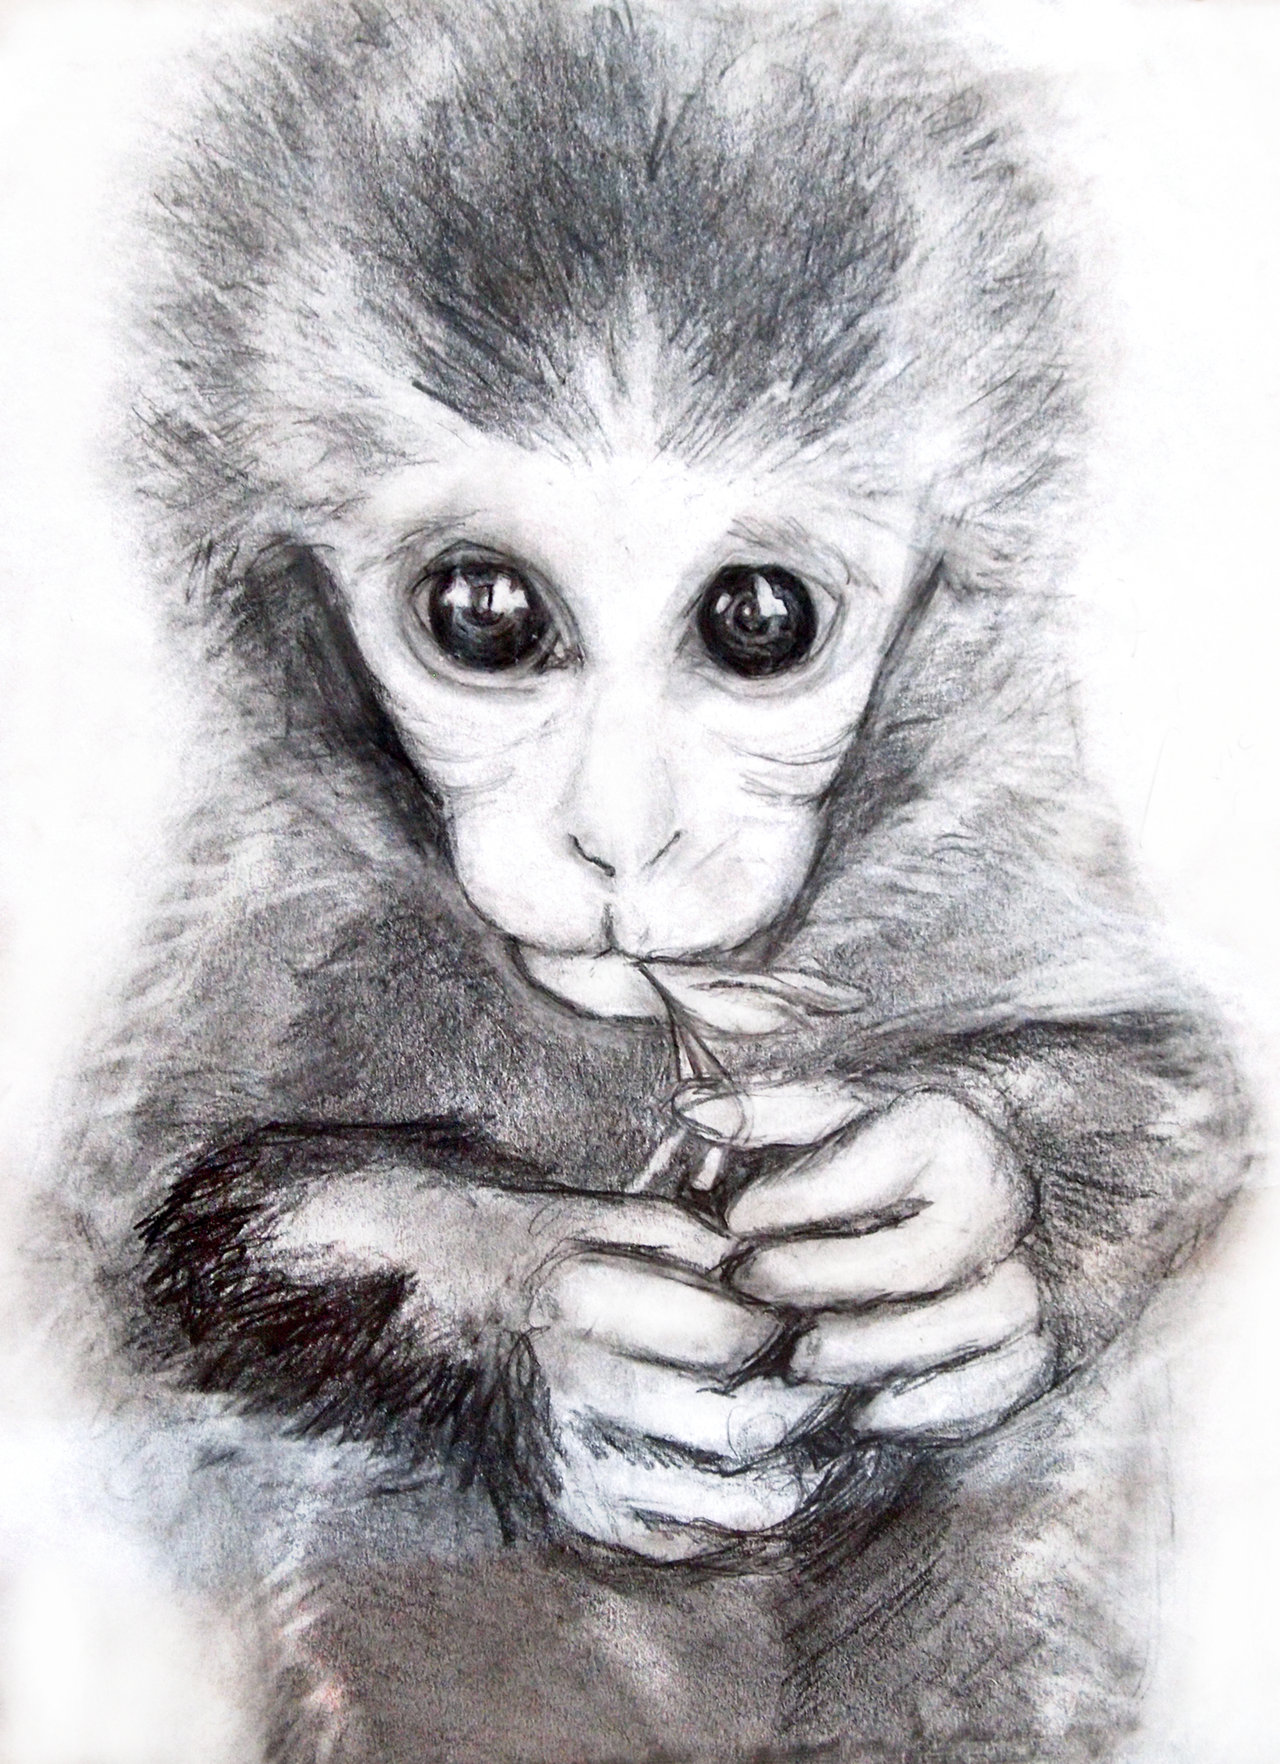 How To Draw A Simple Monkey, Step by Step, Drawing Guide, by Dawn - DragoArt